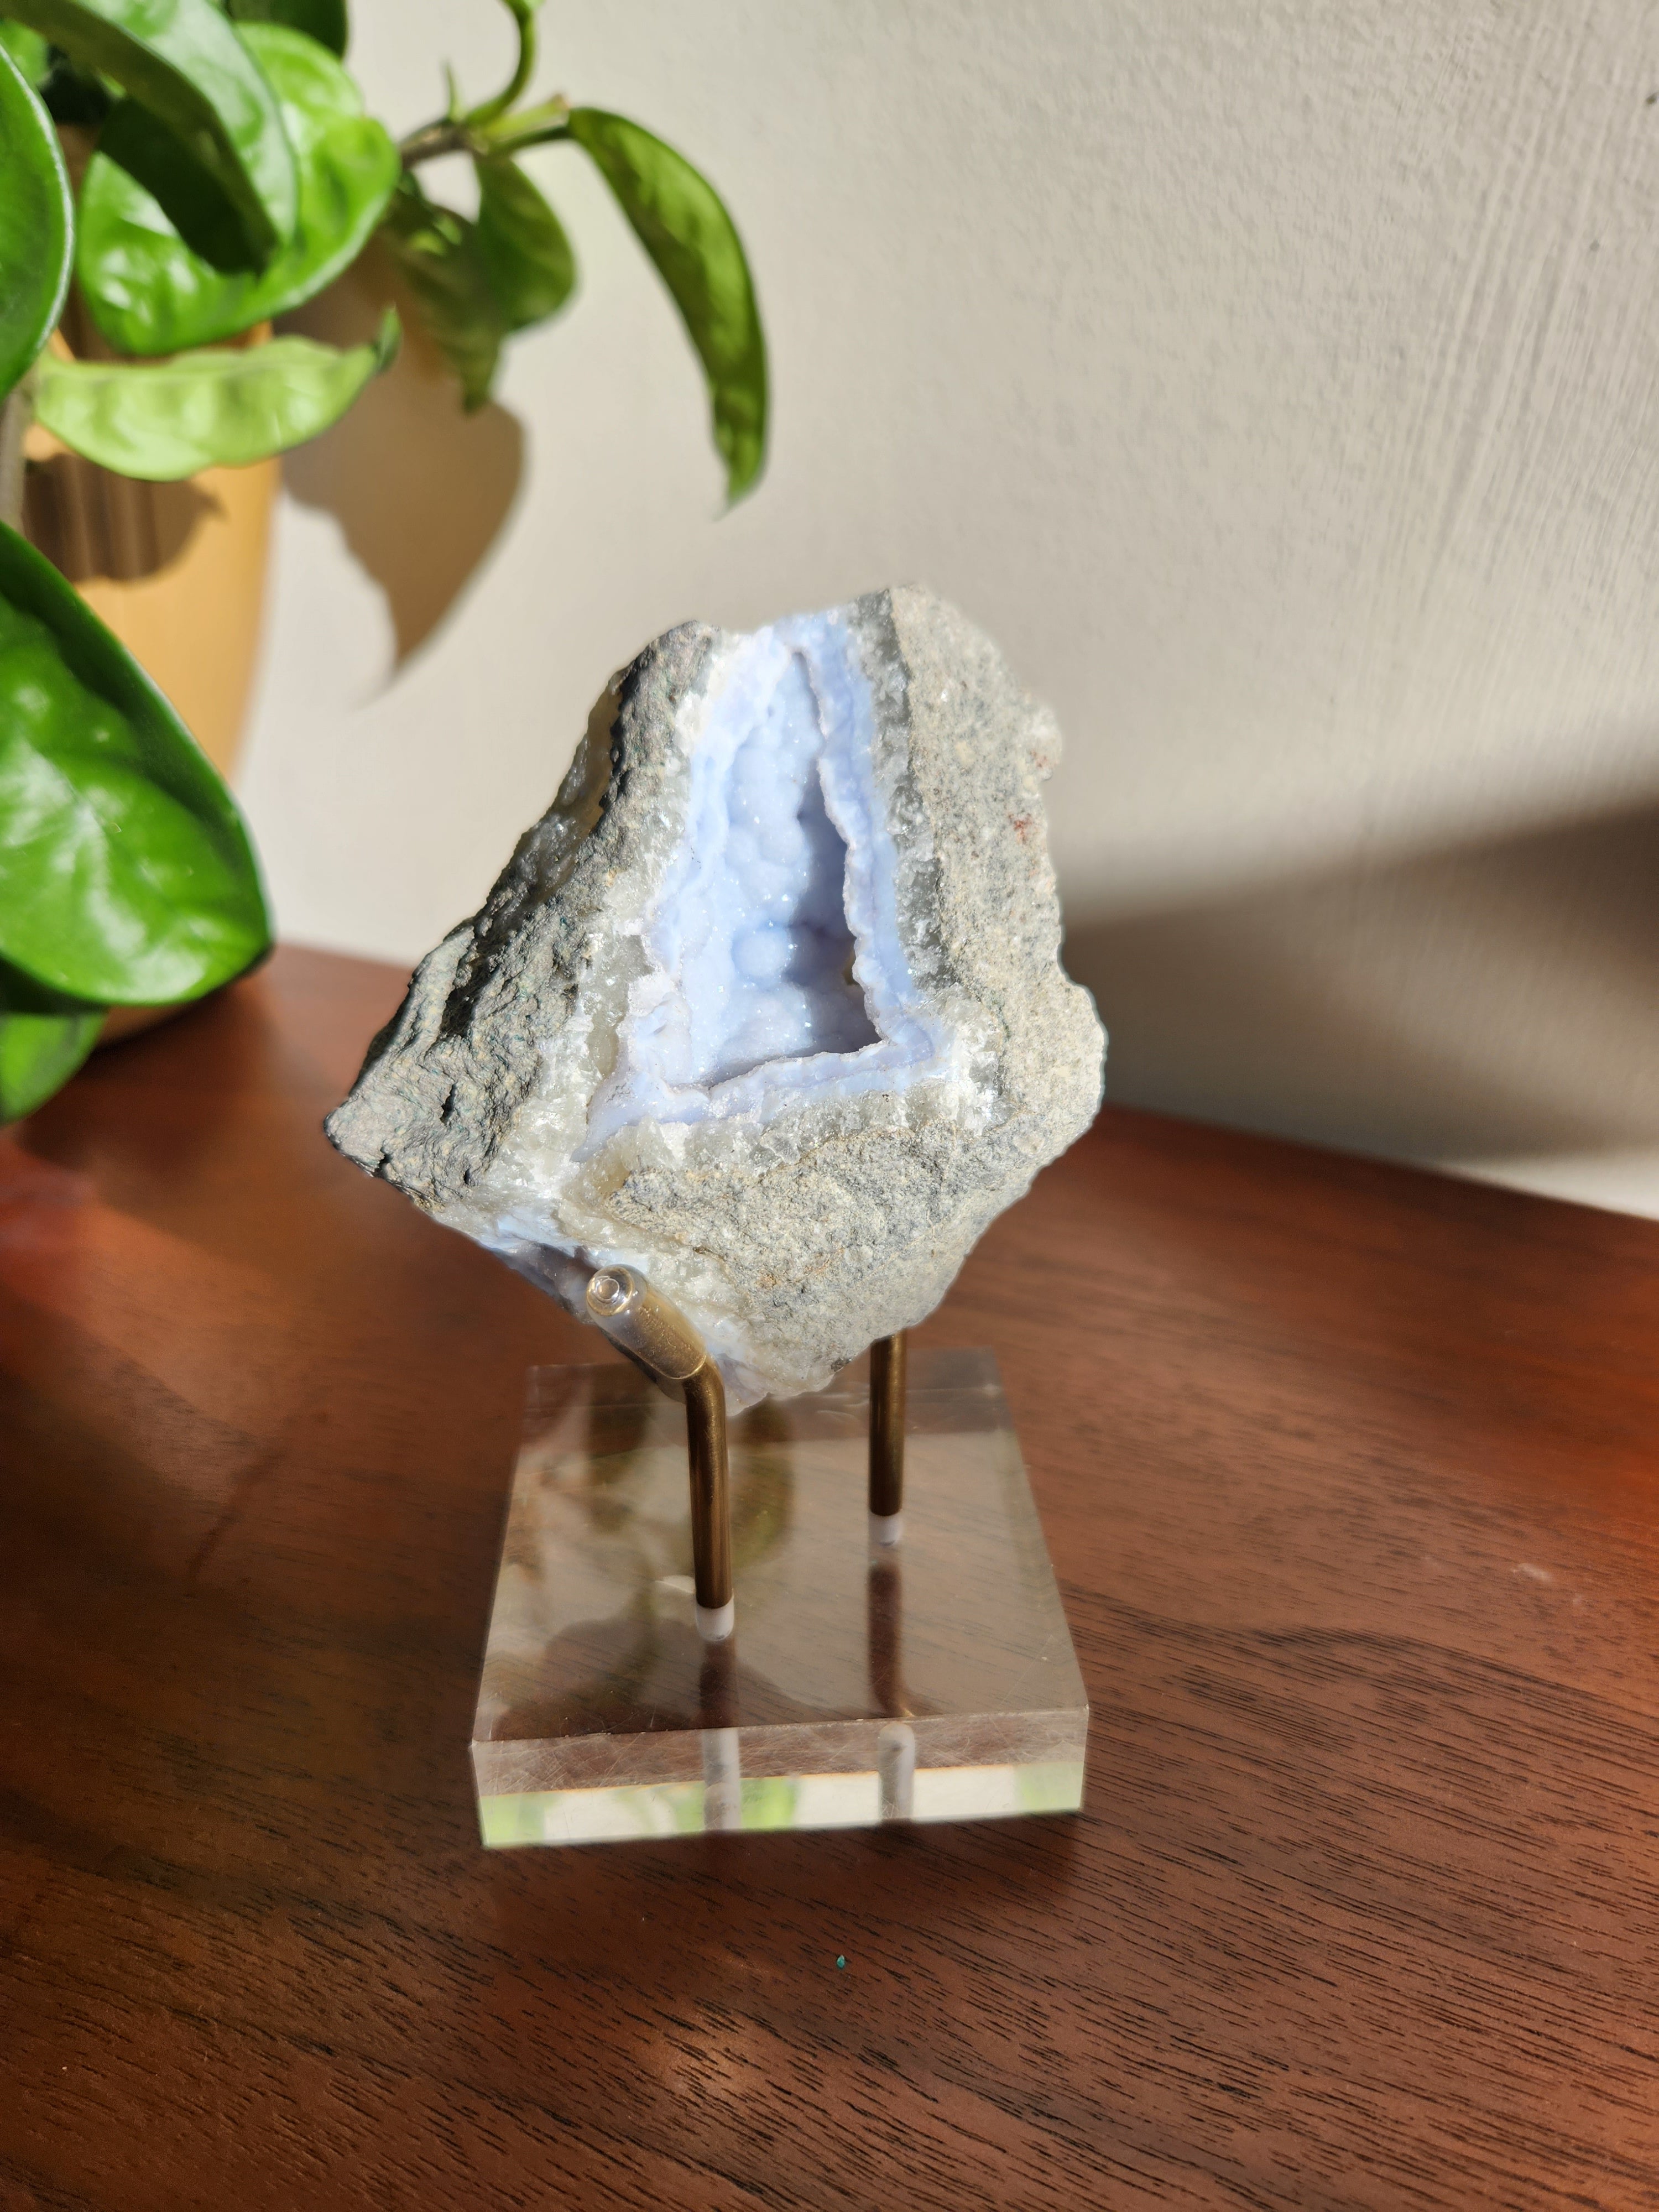 Blue Lace Agate Display 002